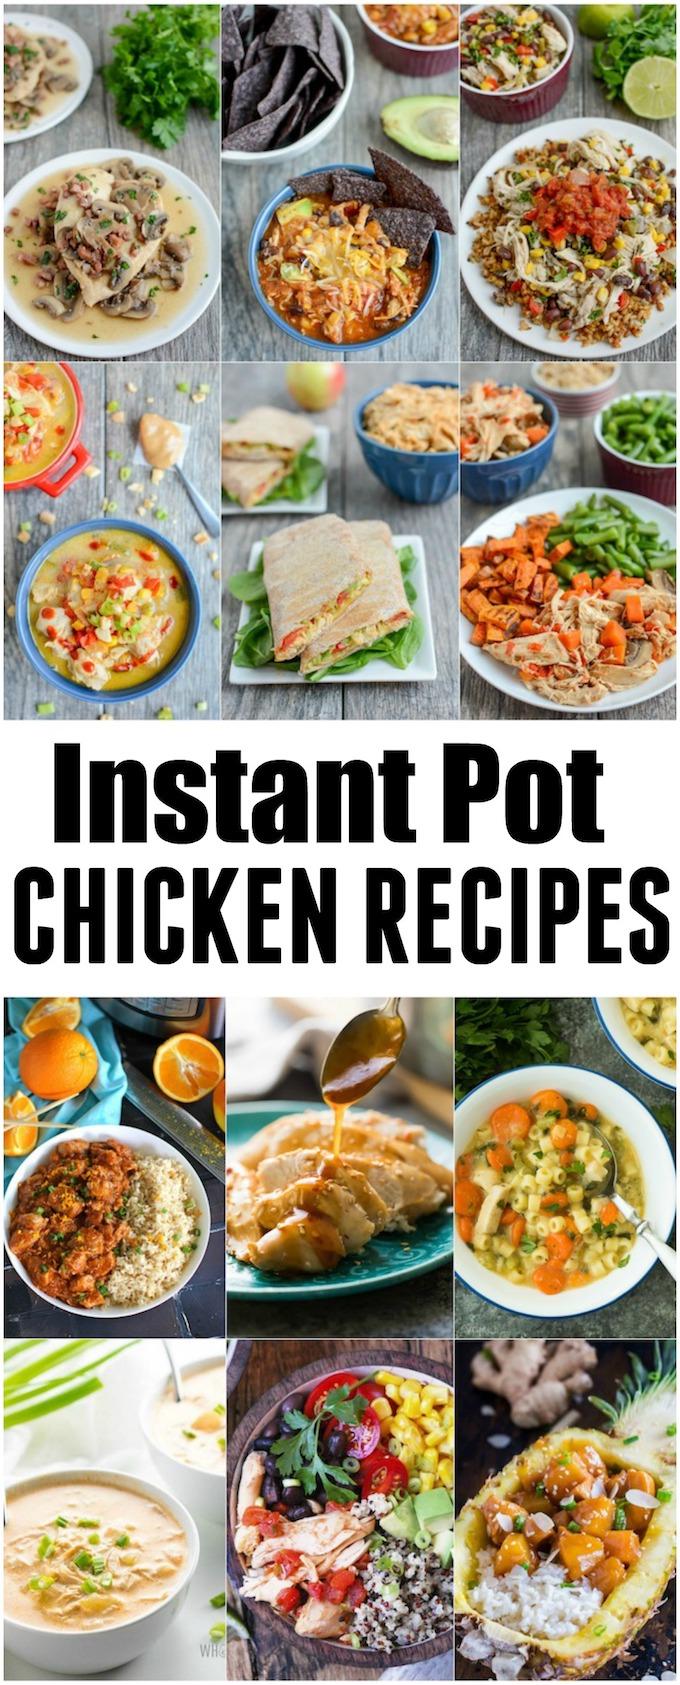 These Healthy Instant Pot Chicken Recipes are perfect for easy, healthy dinners. Plus you can pack the leftovers for lunch!